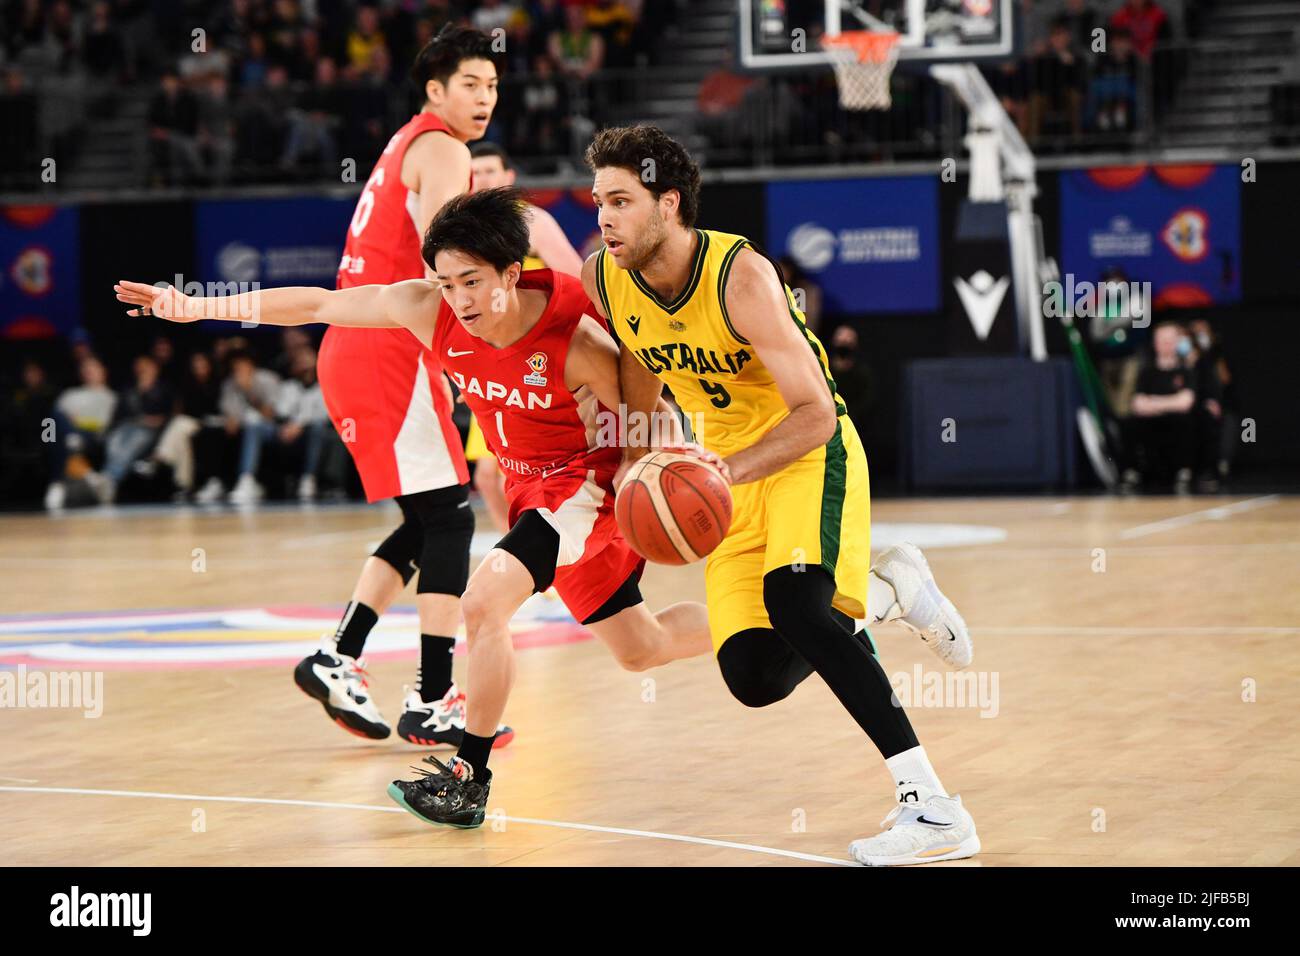 Melbourne, Australia. 1st July, 2022. William McDowell-White (R) of Australia dribbles during a Group B match between Japan and Australia of Basketball World Cup Asian Qualifiers in Melbourne, Australia, July 1, 2022. Credit: Bai Xue/Xinhua/Alamy Live News Stock Photo